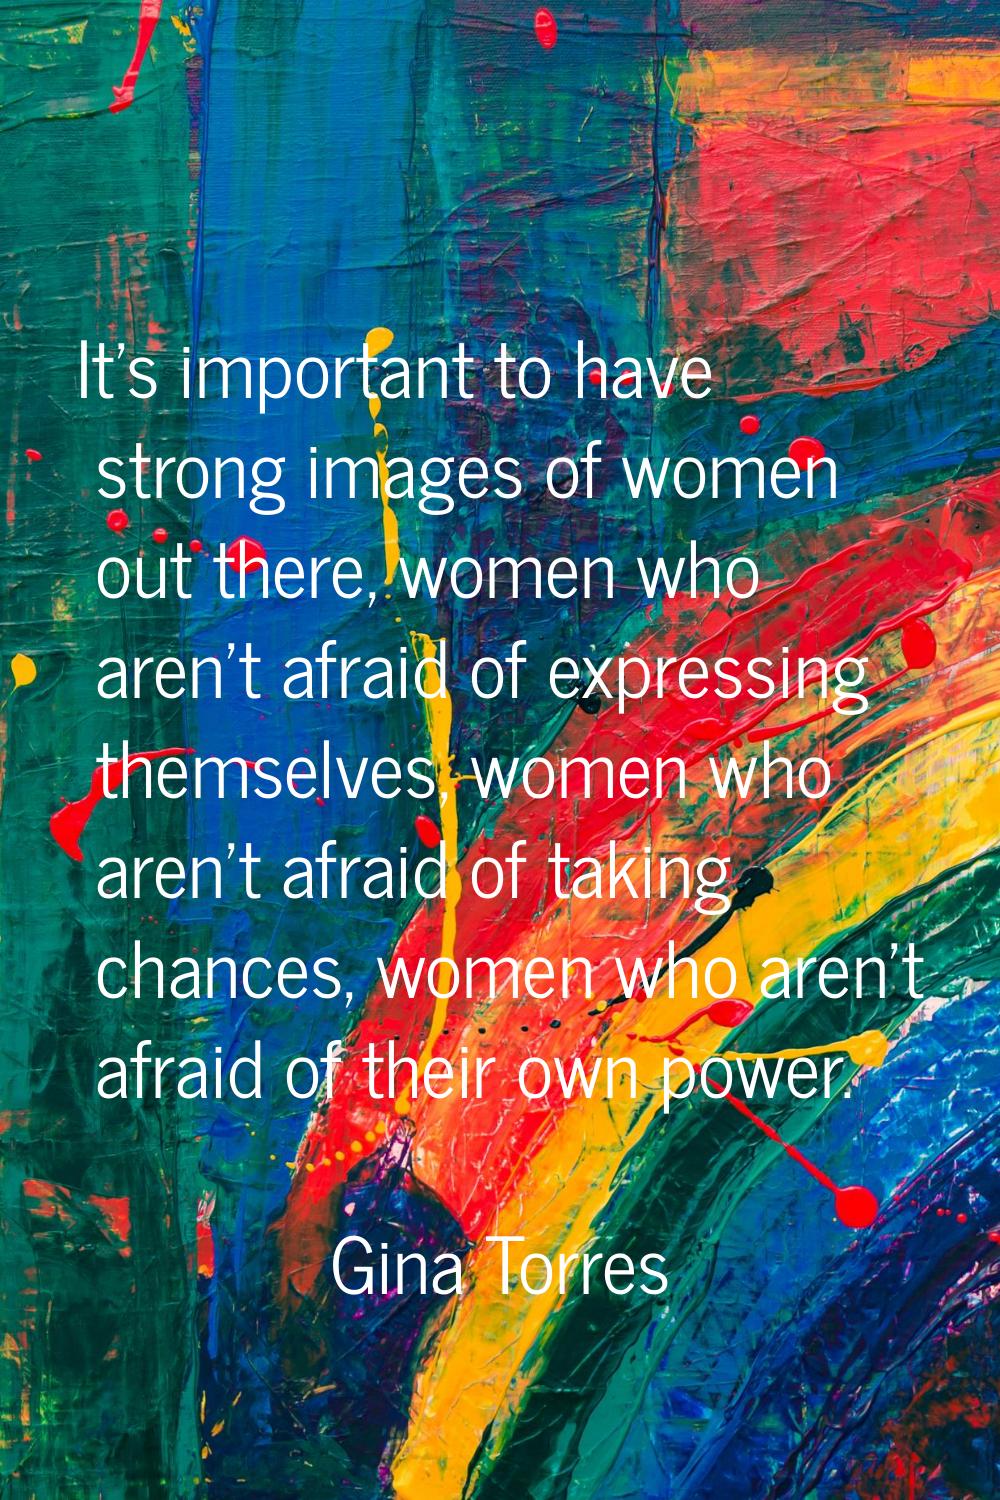 It's important to have strong images of women out there, women who aren't afraid of expressing them